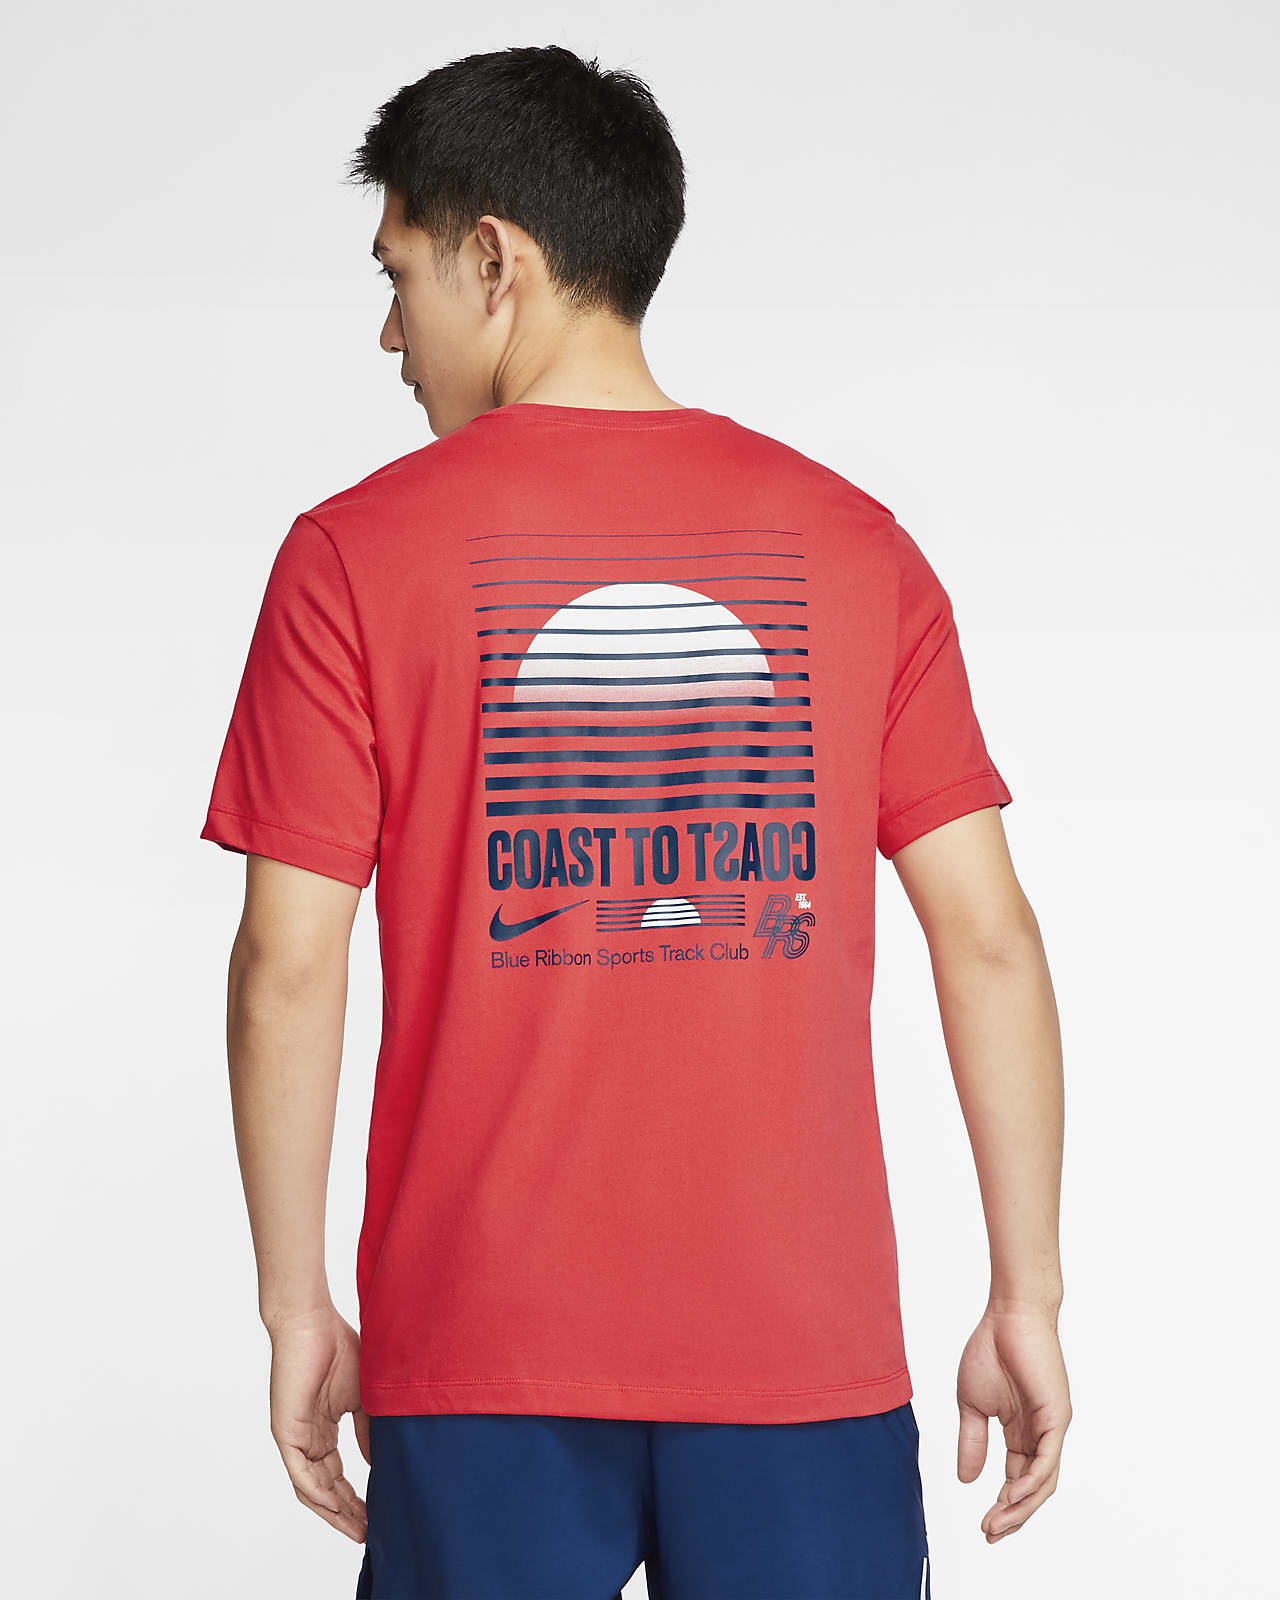 red and blue nike shirt